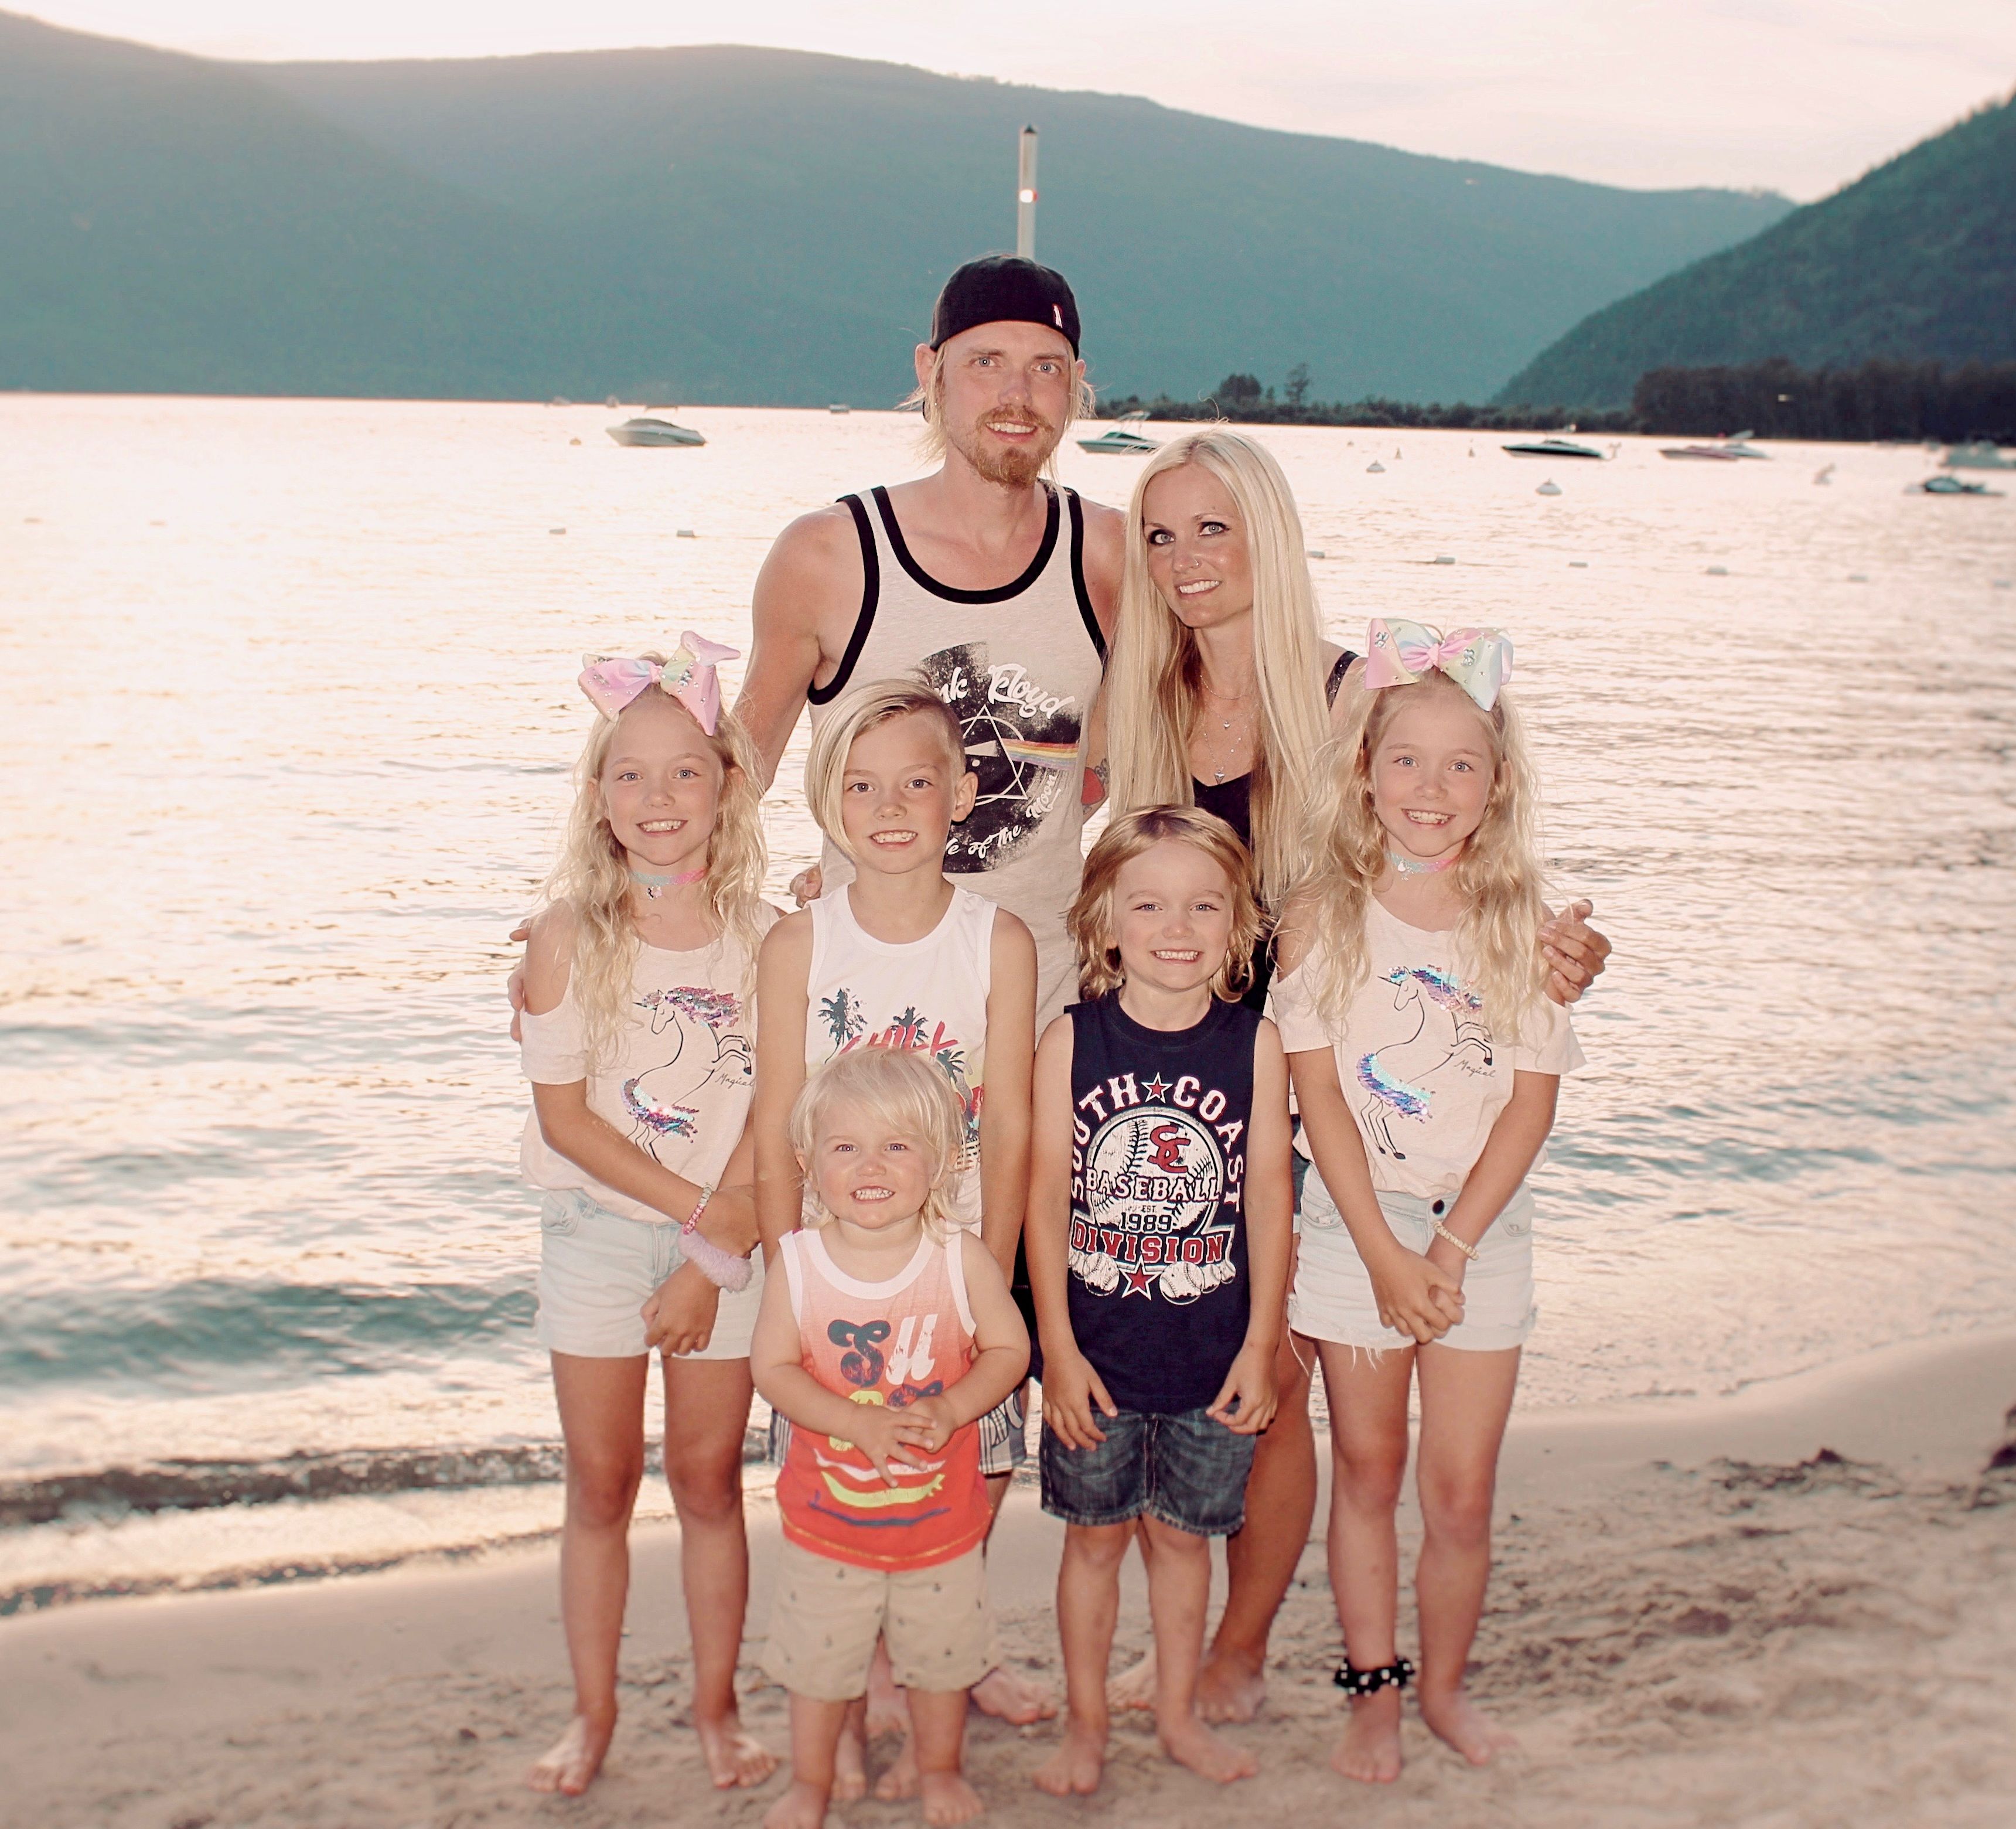 Christian couple at the beach with their 5 beautiful children